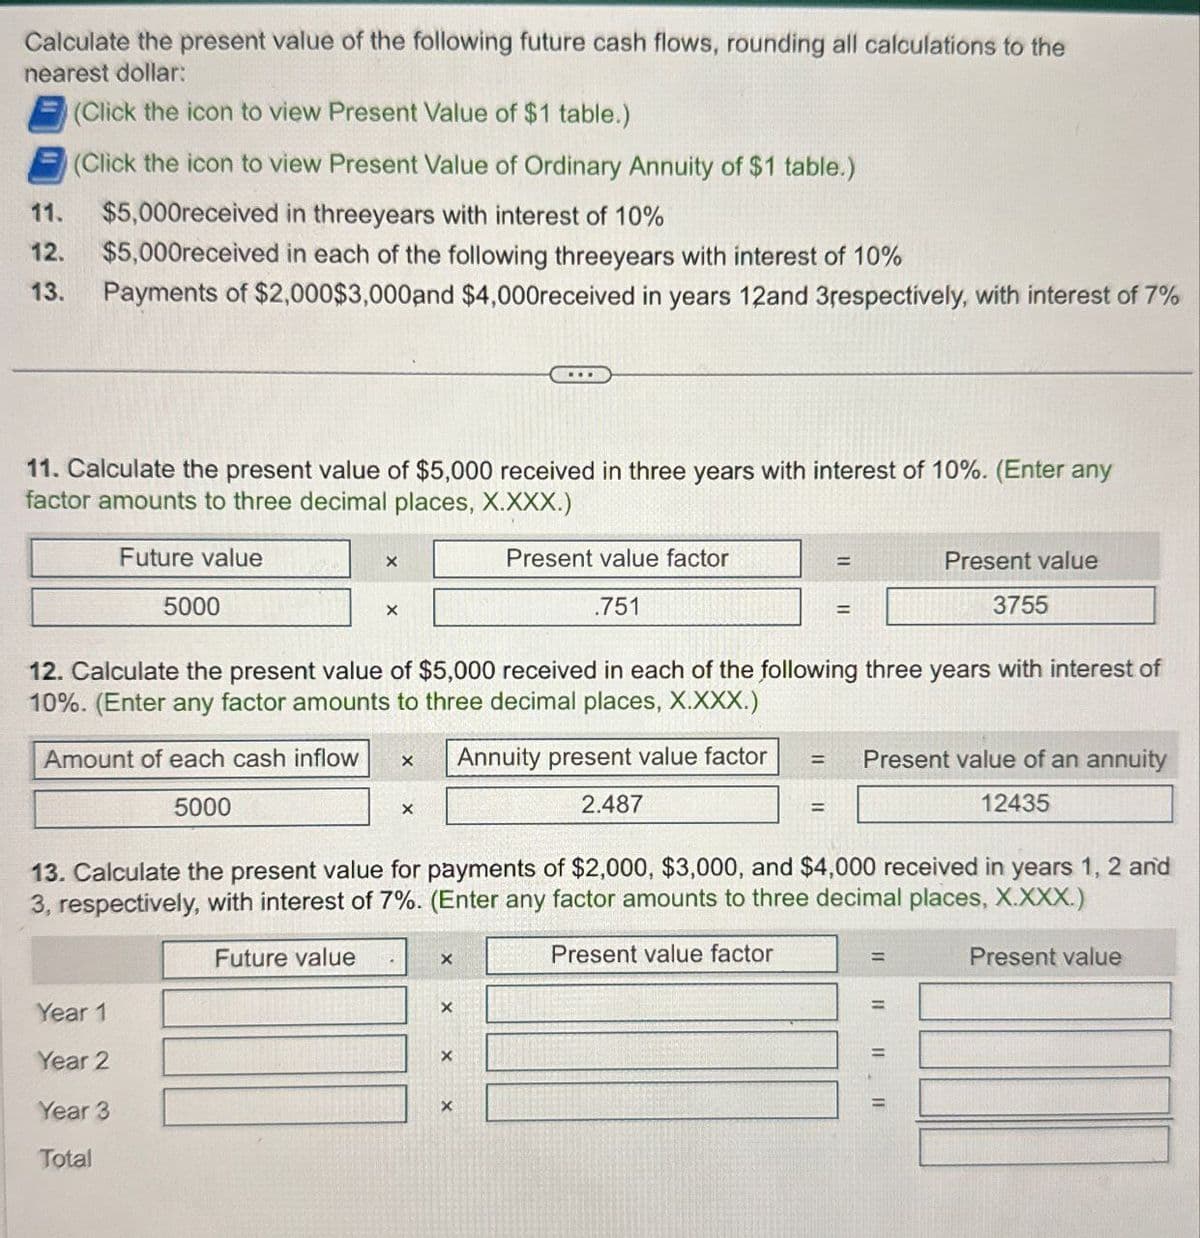 Calculate the present value of the following future cash flows, rounding all calculations to the
nearest dollar:
11.
12.
13.
(Click the icon to view Present Value of $1 table.)
(Click the icon to view Present Value of Ordinary Annuity of $1 table.)
$5,000received in threeyears with interest of 10%
$5,000received in each of the following threeyears with interest of 10%
Payments of $2,000 $3,000 and $4,000received in years 12and 3respectively, with interest of 7%
11. Calculate the present value of $5,000 received in three years with interest of 10%. (Enter any
factor amounts to three decimal places, X.XXX.)
Future value
5000
×
X
Present value factor
.751
=
Present value
=
3755
12. Calculate the present value of $5,000 received in each of the following three years with interest of
10%. (Enter any factor amounts to three decimal places, X.XXX.)
Amount of each cash inflow
X
Annuity present value factor
5000
×
2.487
=
Present value of an annuity
12435
13. Calculate the present value for payments of $2,000, $3,000, and $4,000 received in years 1, 2 and
3, respectively, with interest of 7%. (Enter any factor amounts to three decimal places, X.XXX.)
Future value
Year 1
Year 2
Year 3
Total
x
×
×
×
Present value factor
=
=
Present value